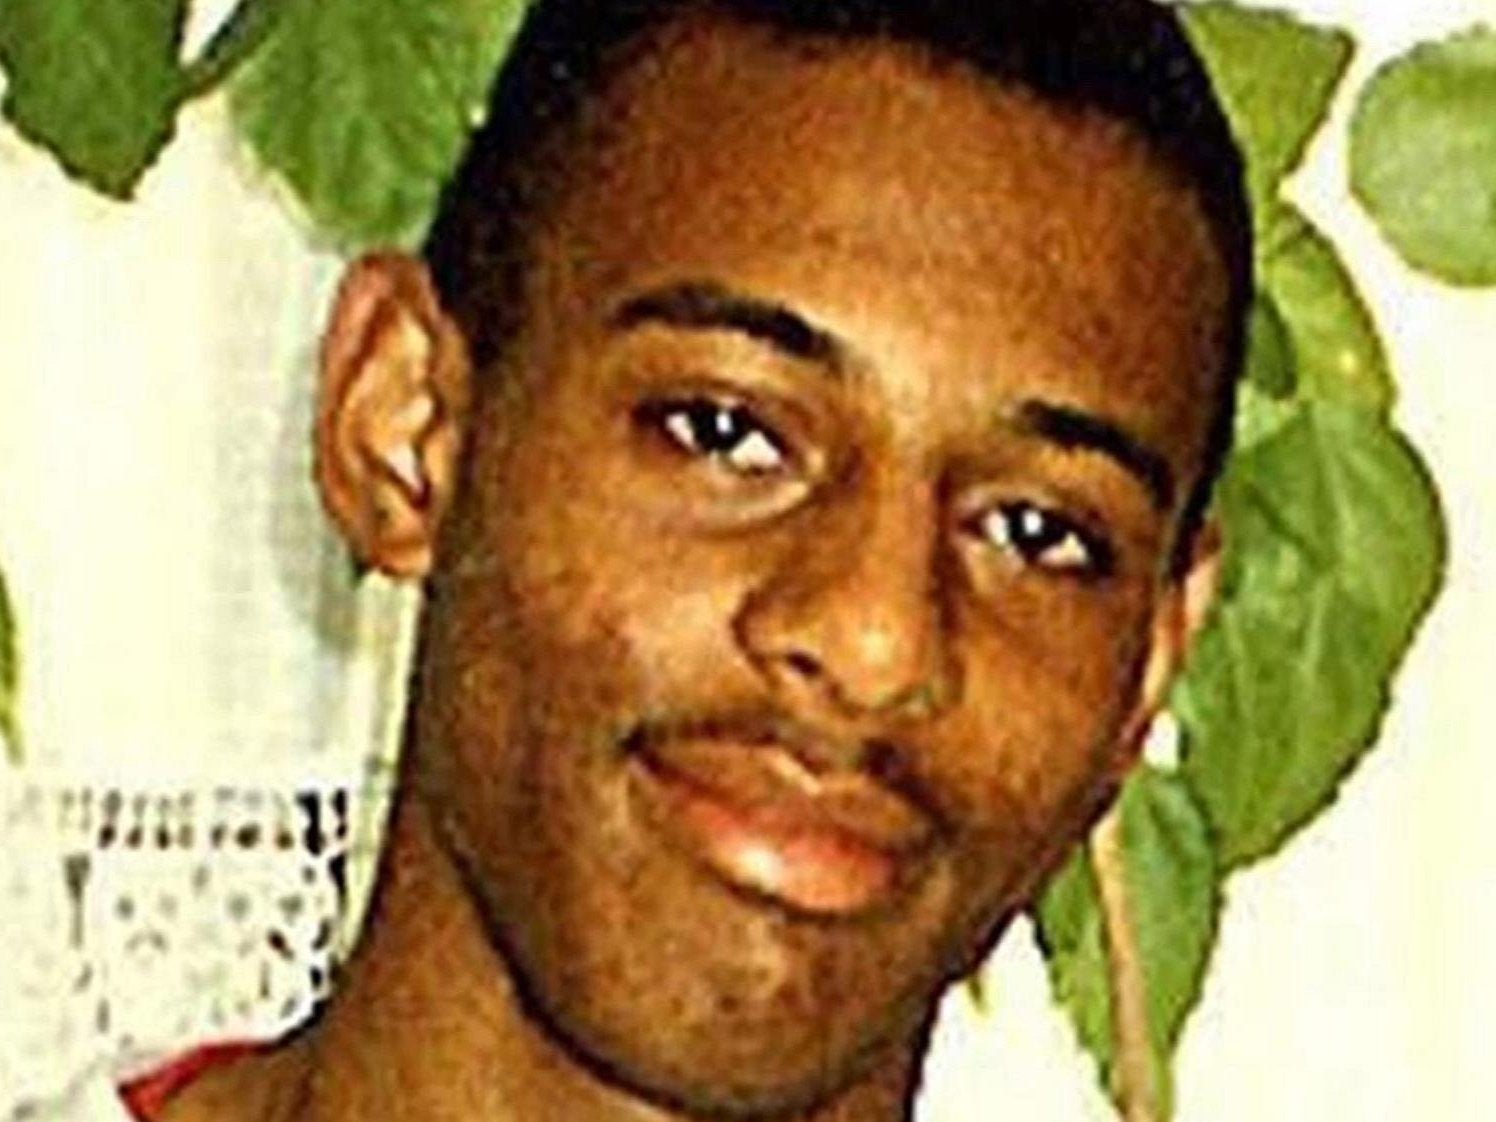 A report into the murder of Stephen Lawrence in 1999 found ‘unwitting prejudice, ignorance, thoughtlessness and racist stereotyping’